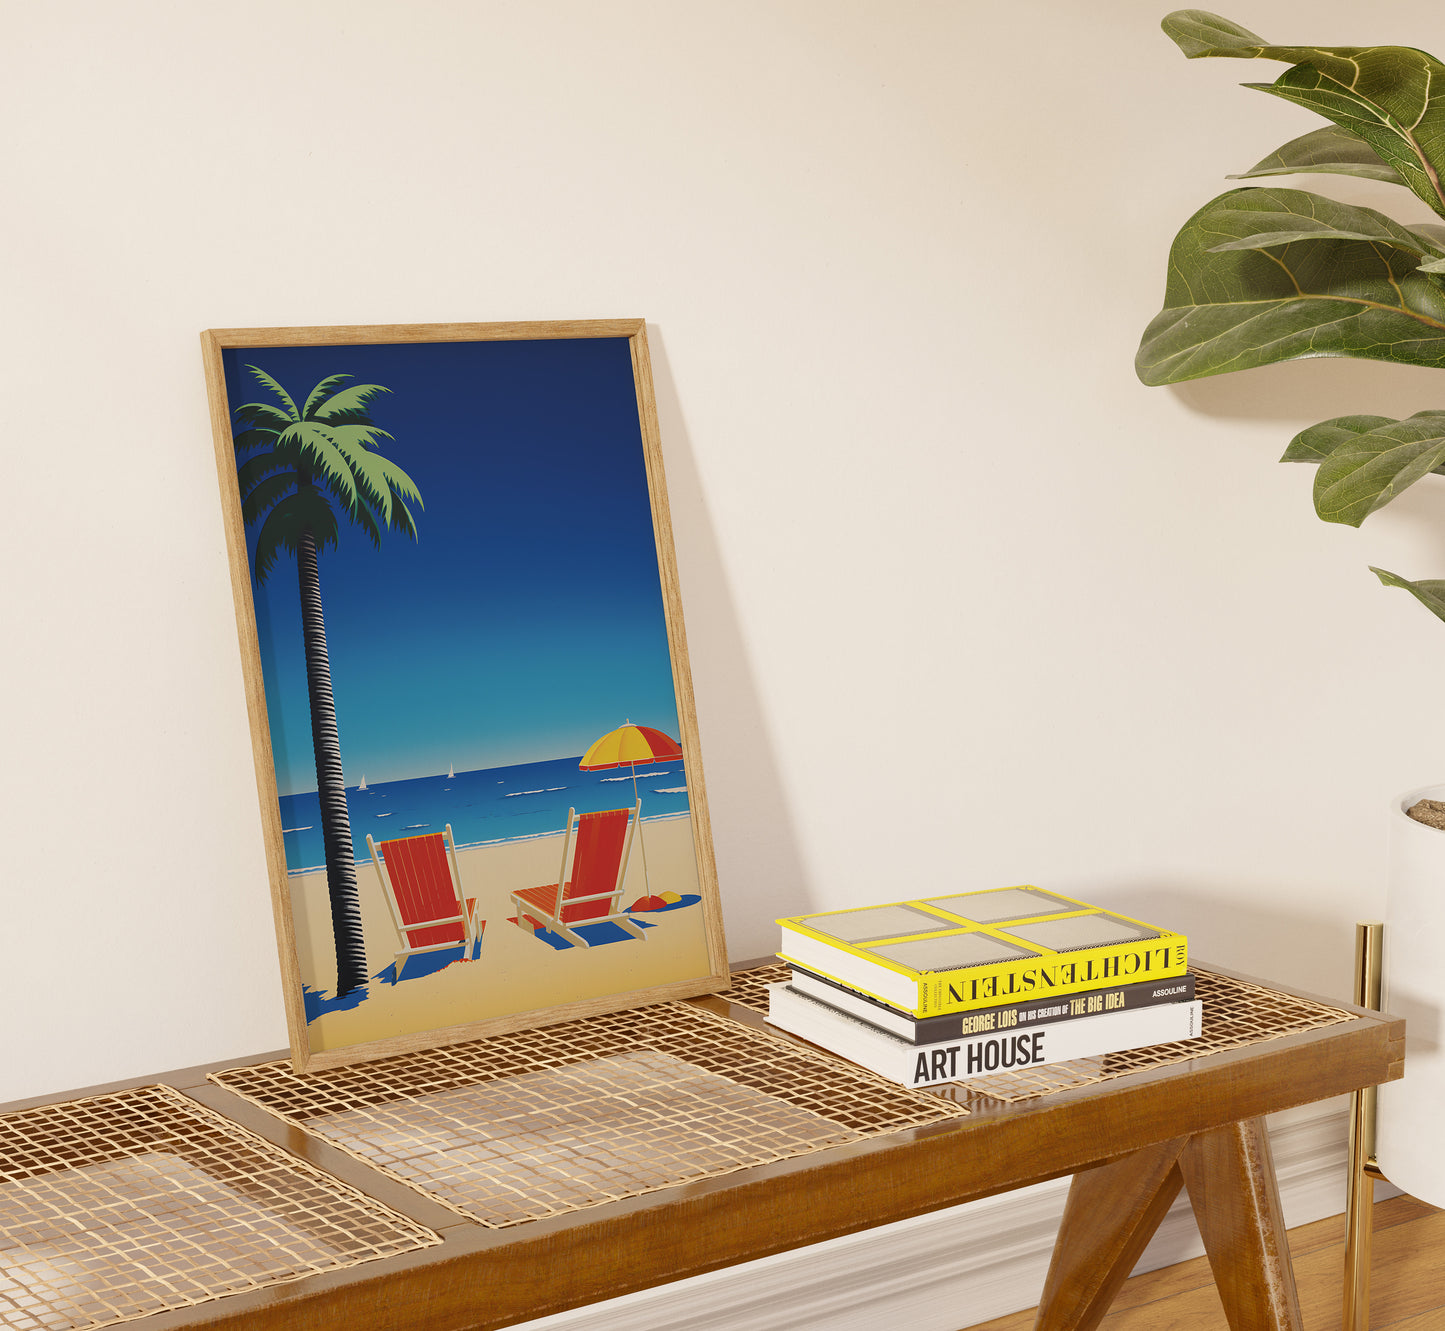 A tropical beach poster leaning against a wall on a side table with decorative books.